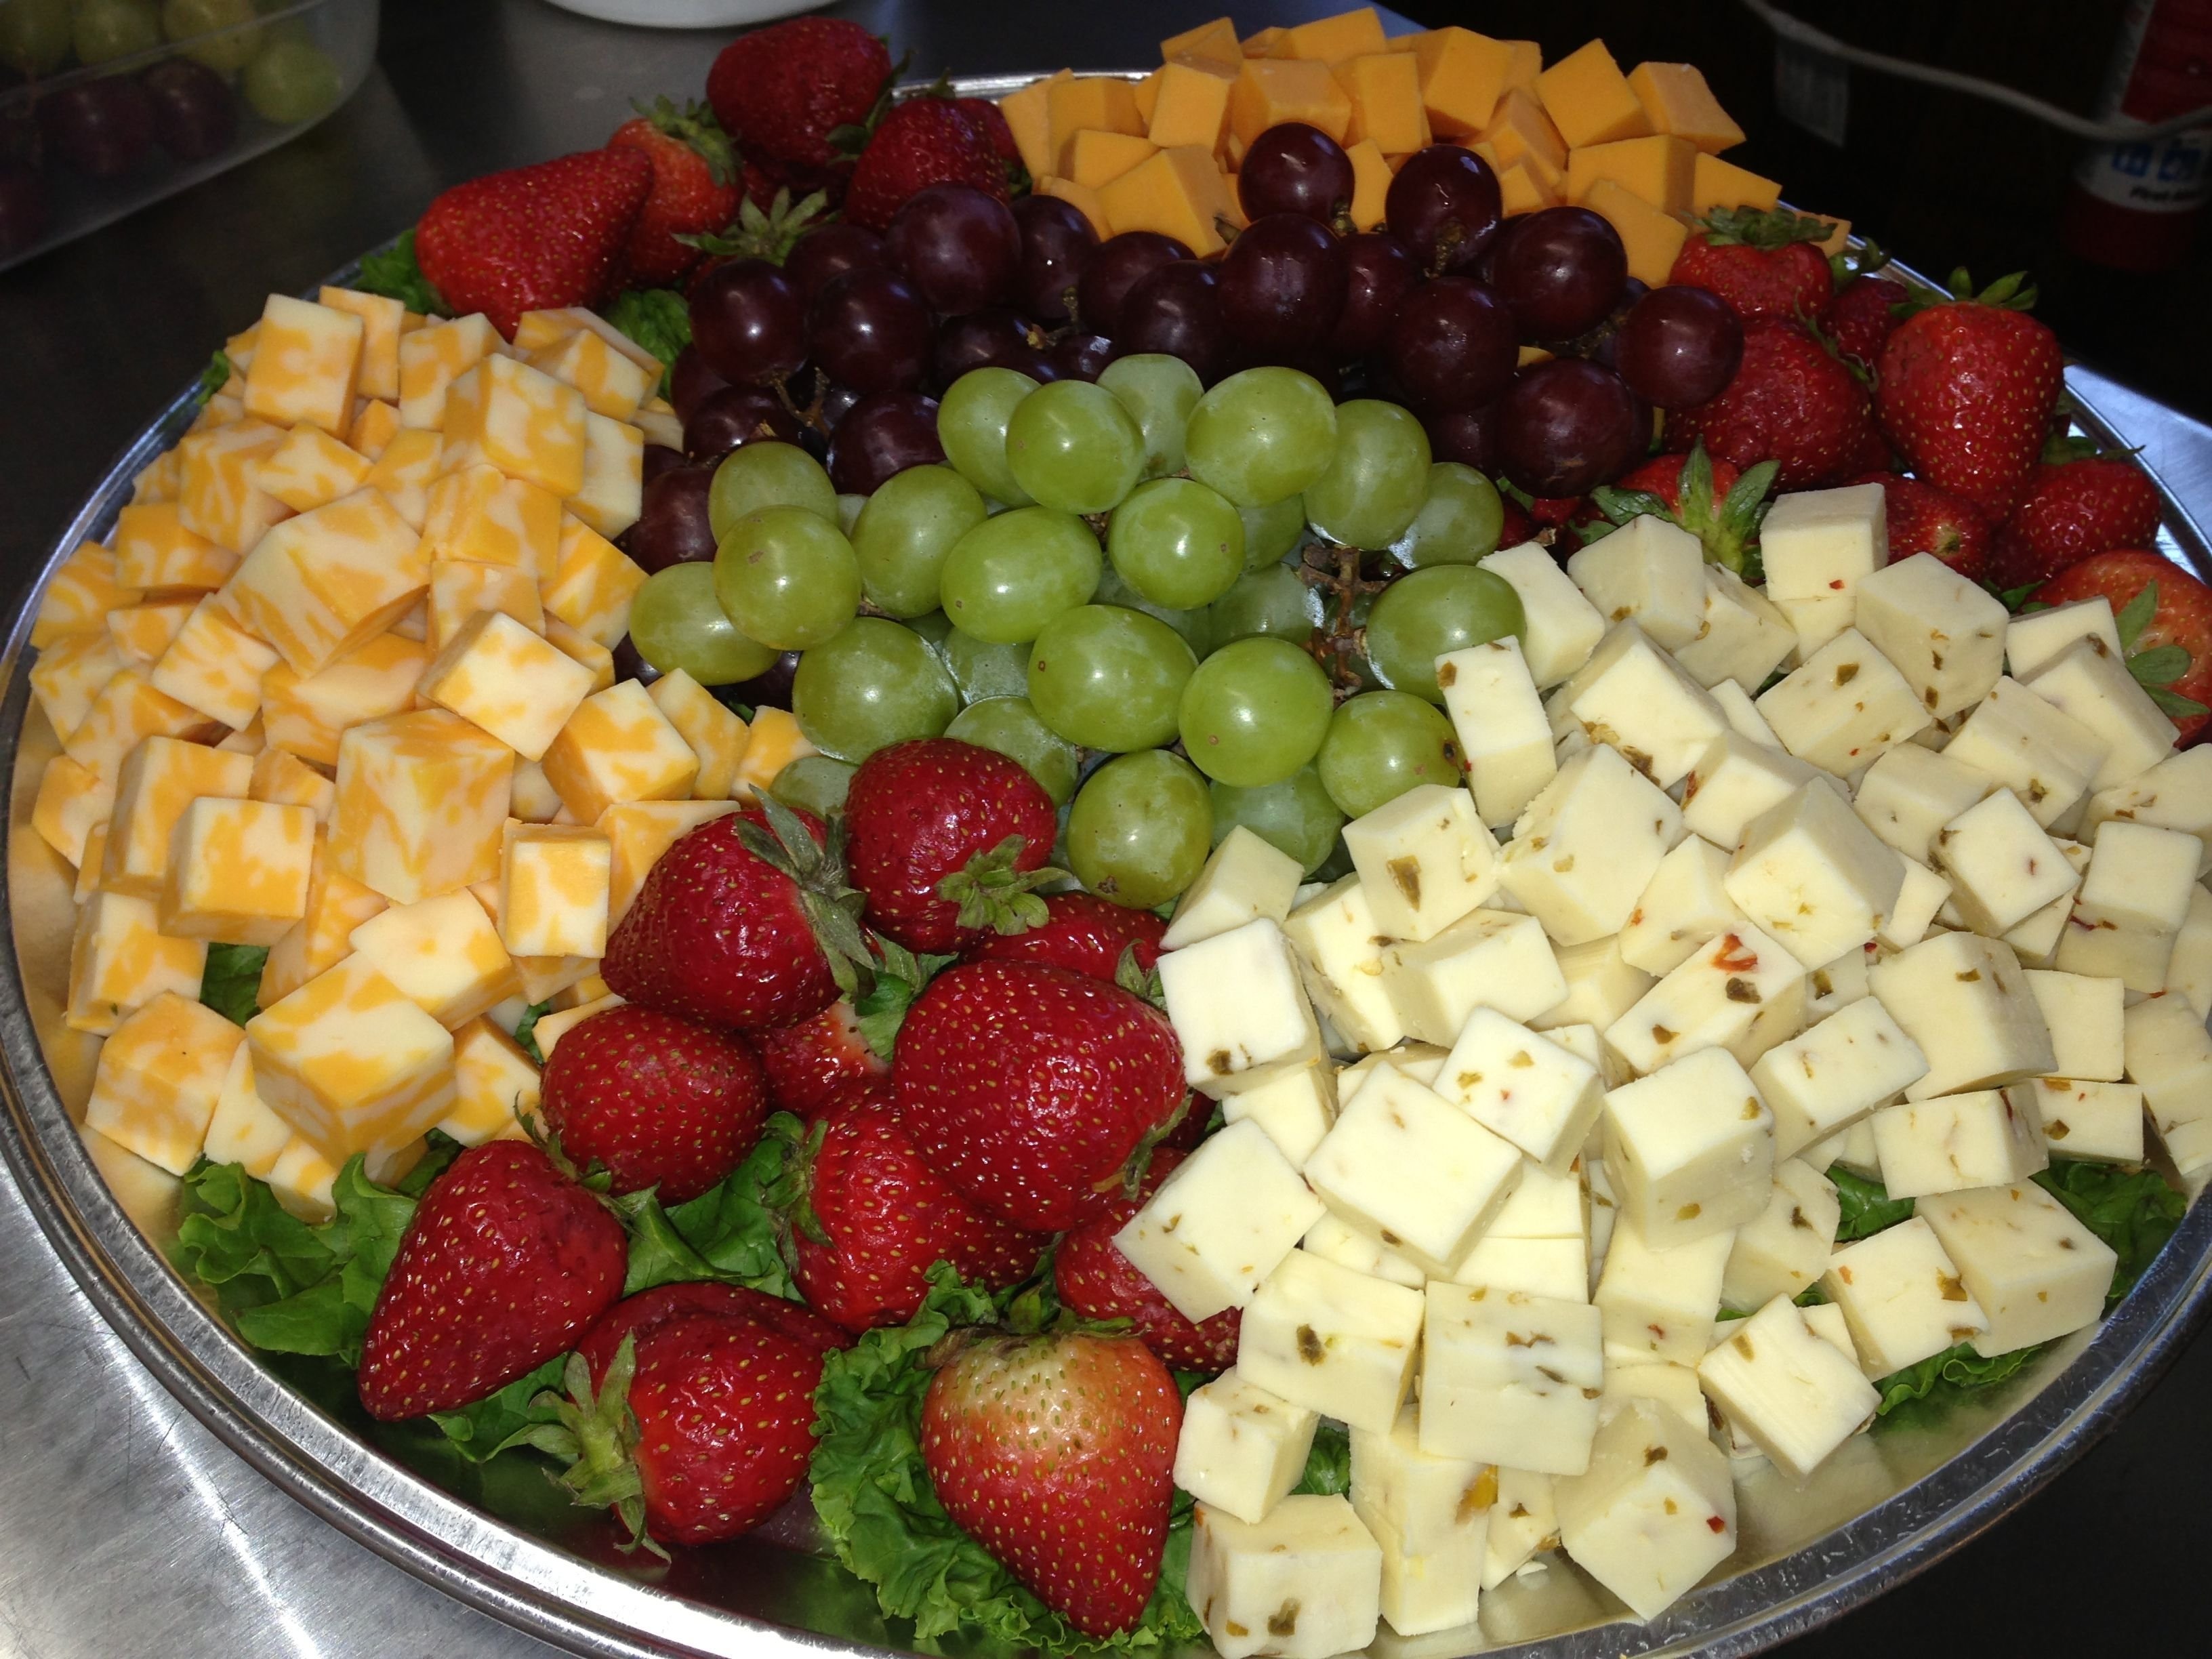 10 Perfect Fruit And Cheese Platter Ideas cheese and fruit platter ideas for weddings kitchen sisters 2022